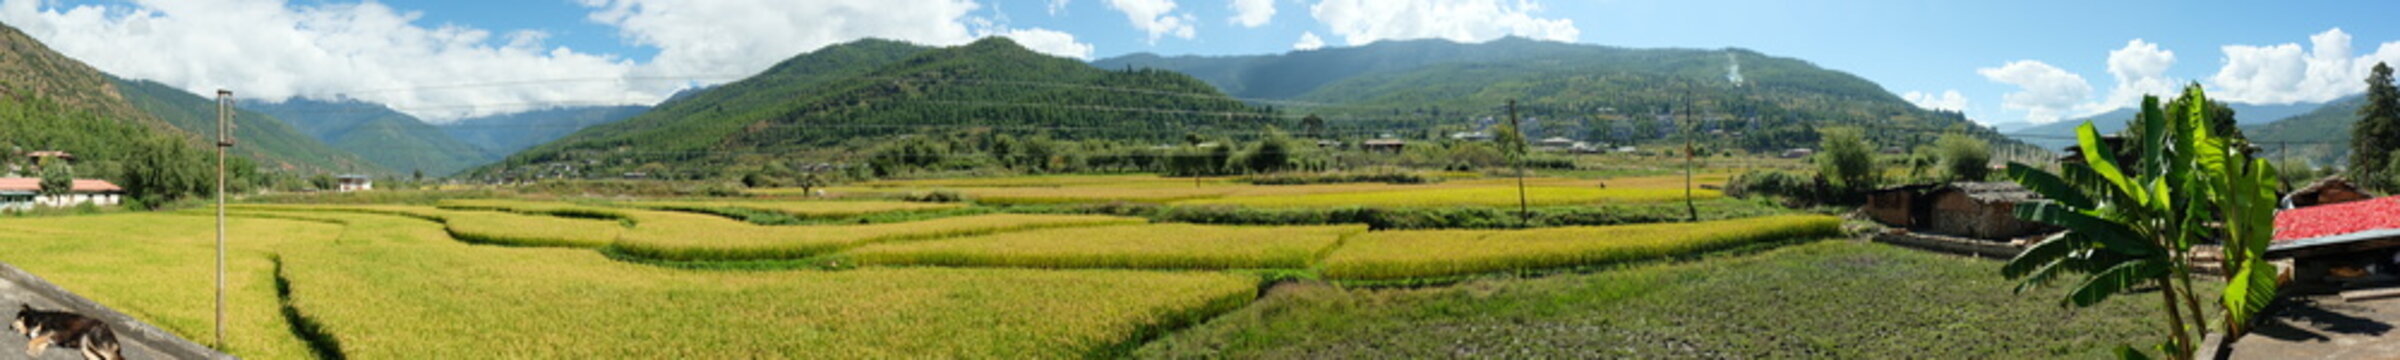 Panoramic landscape of rice terrace, mountains and a backyard in Paro, Bhutan